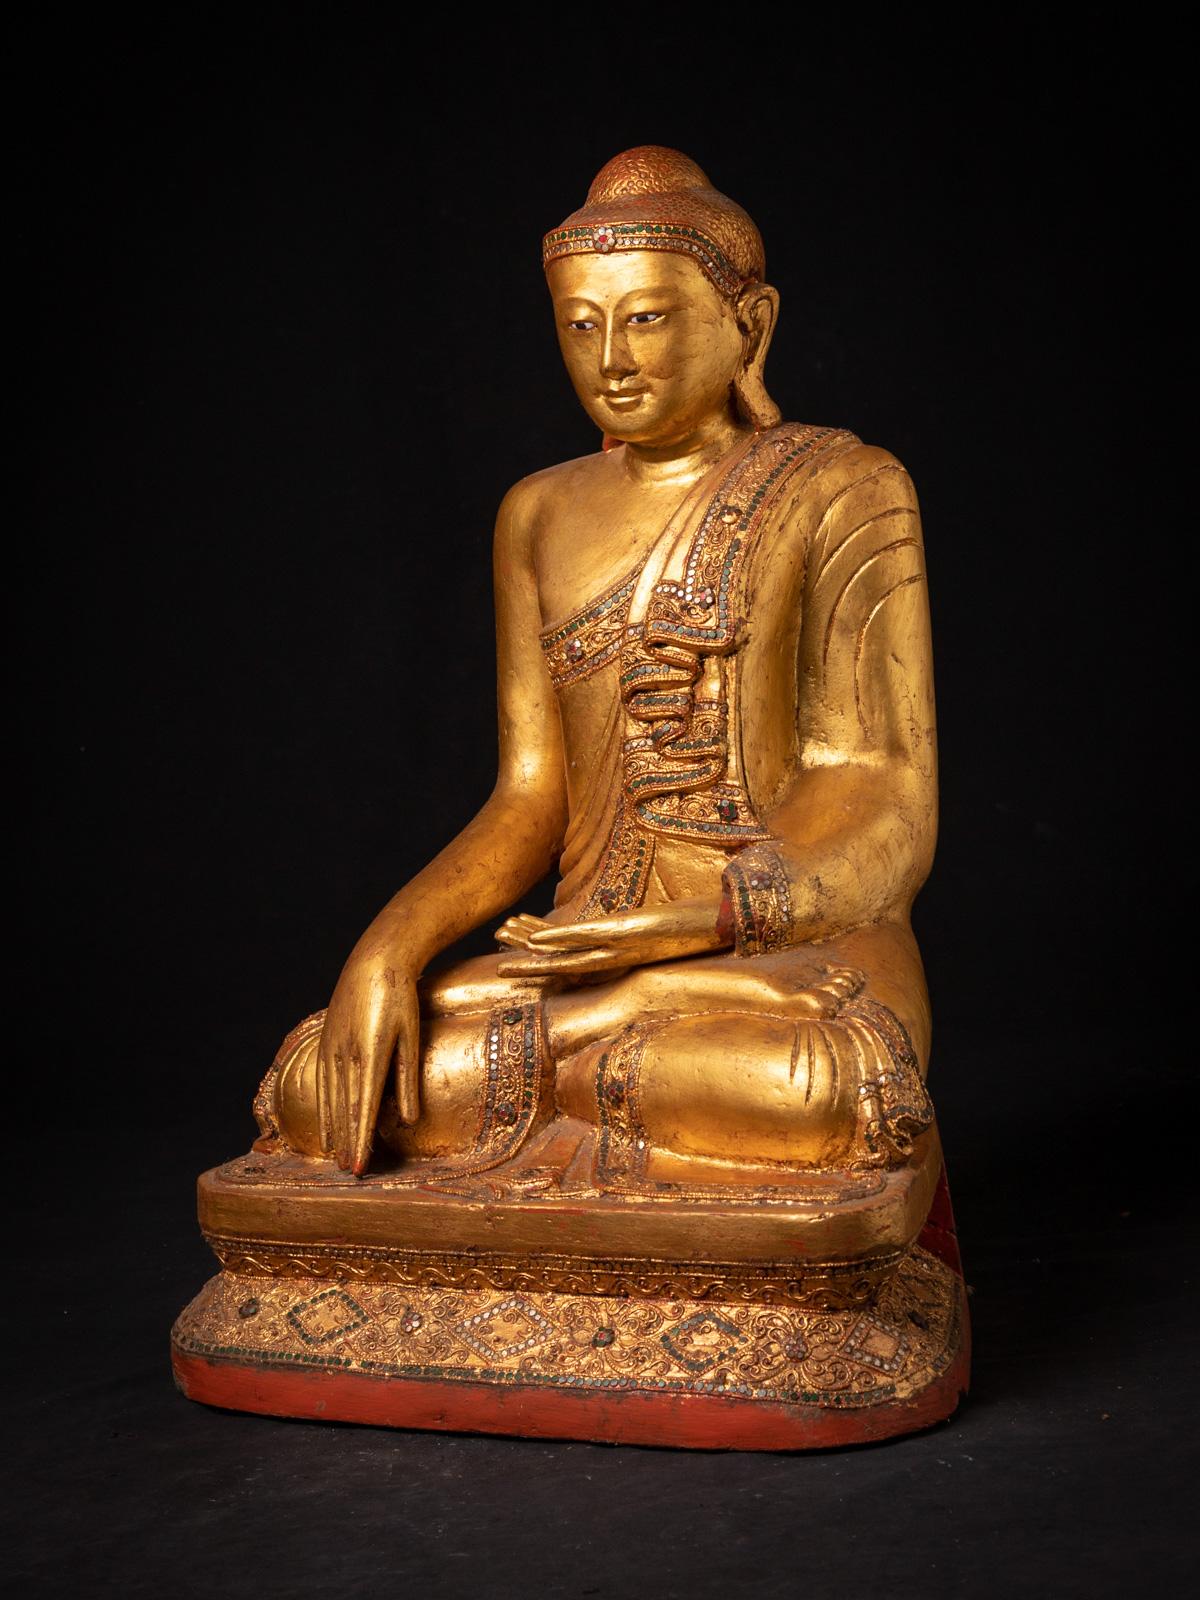 The old wooden Burmese Mandalay Buddha statue is a magnificent representation of artistic and spiritual craftsmanship. Crafted from wood, this statue stands 66 cm tall, with dimensions of 44.5 cm in width and 34.5 cm in depth. Its impressive size